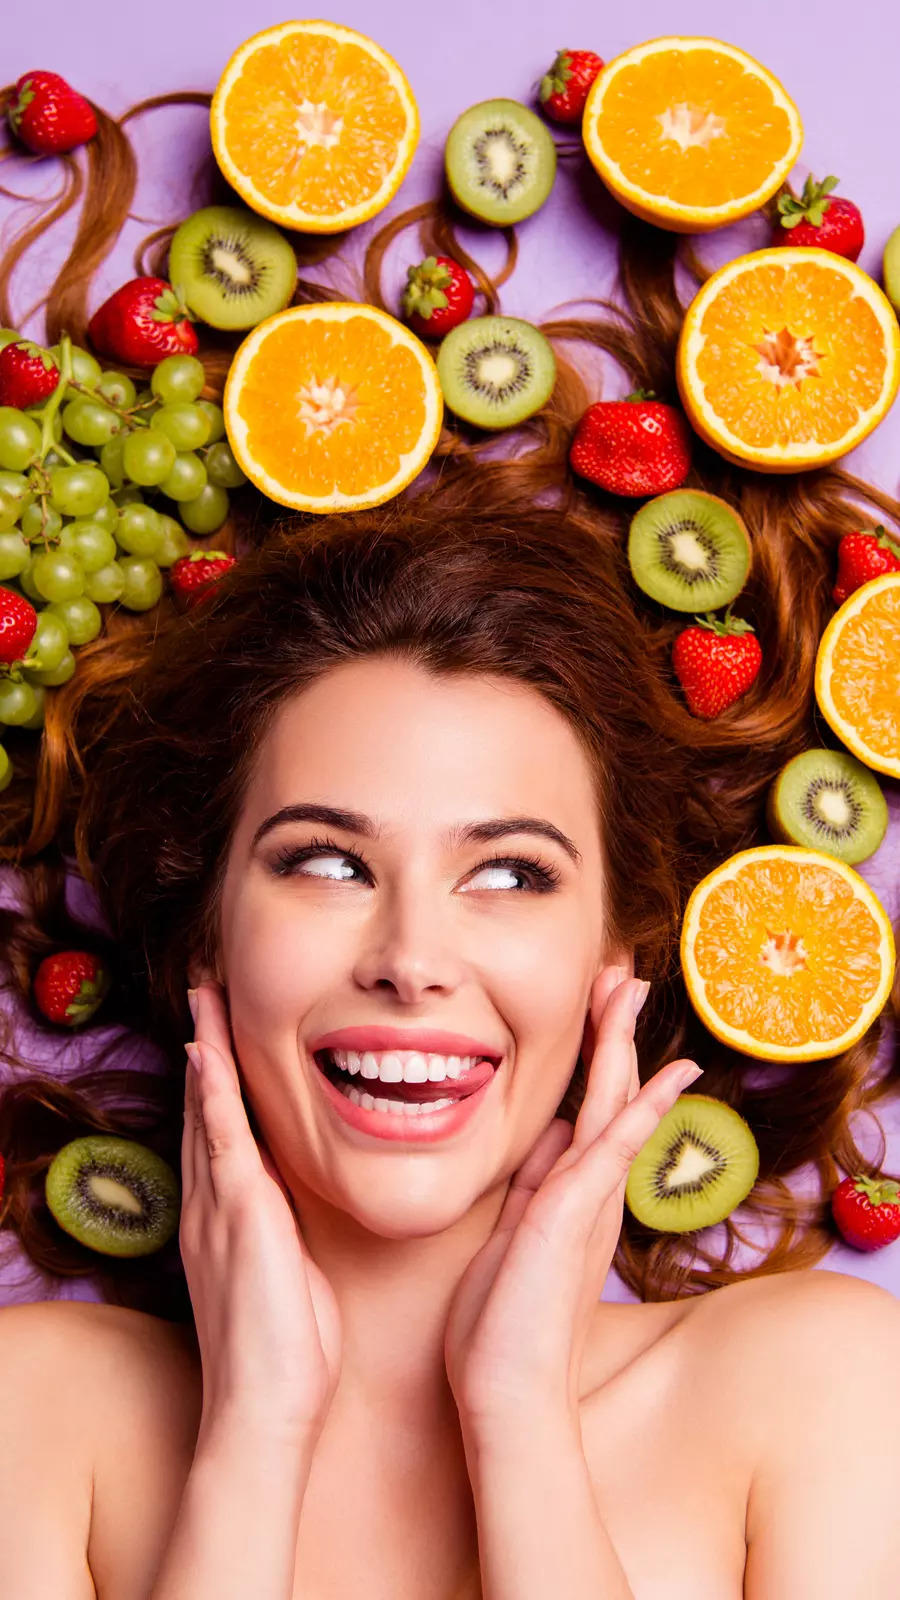 Foods that are good for your skin and hair | EconomicTimes